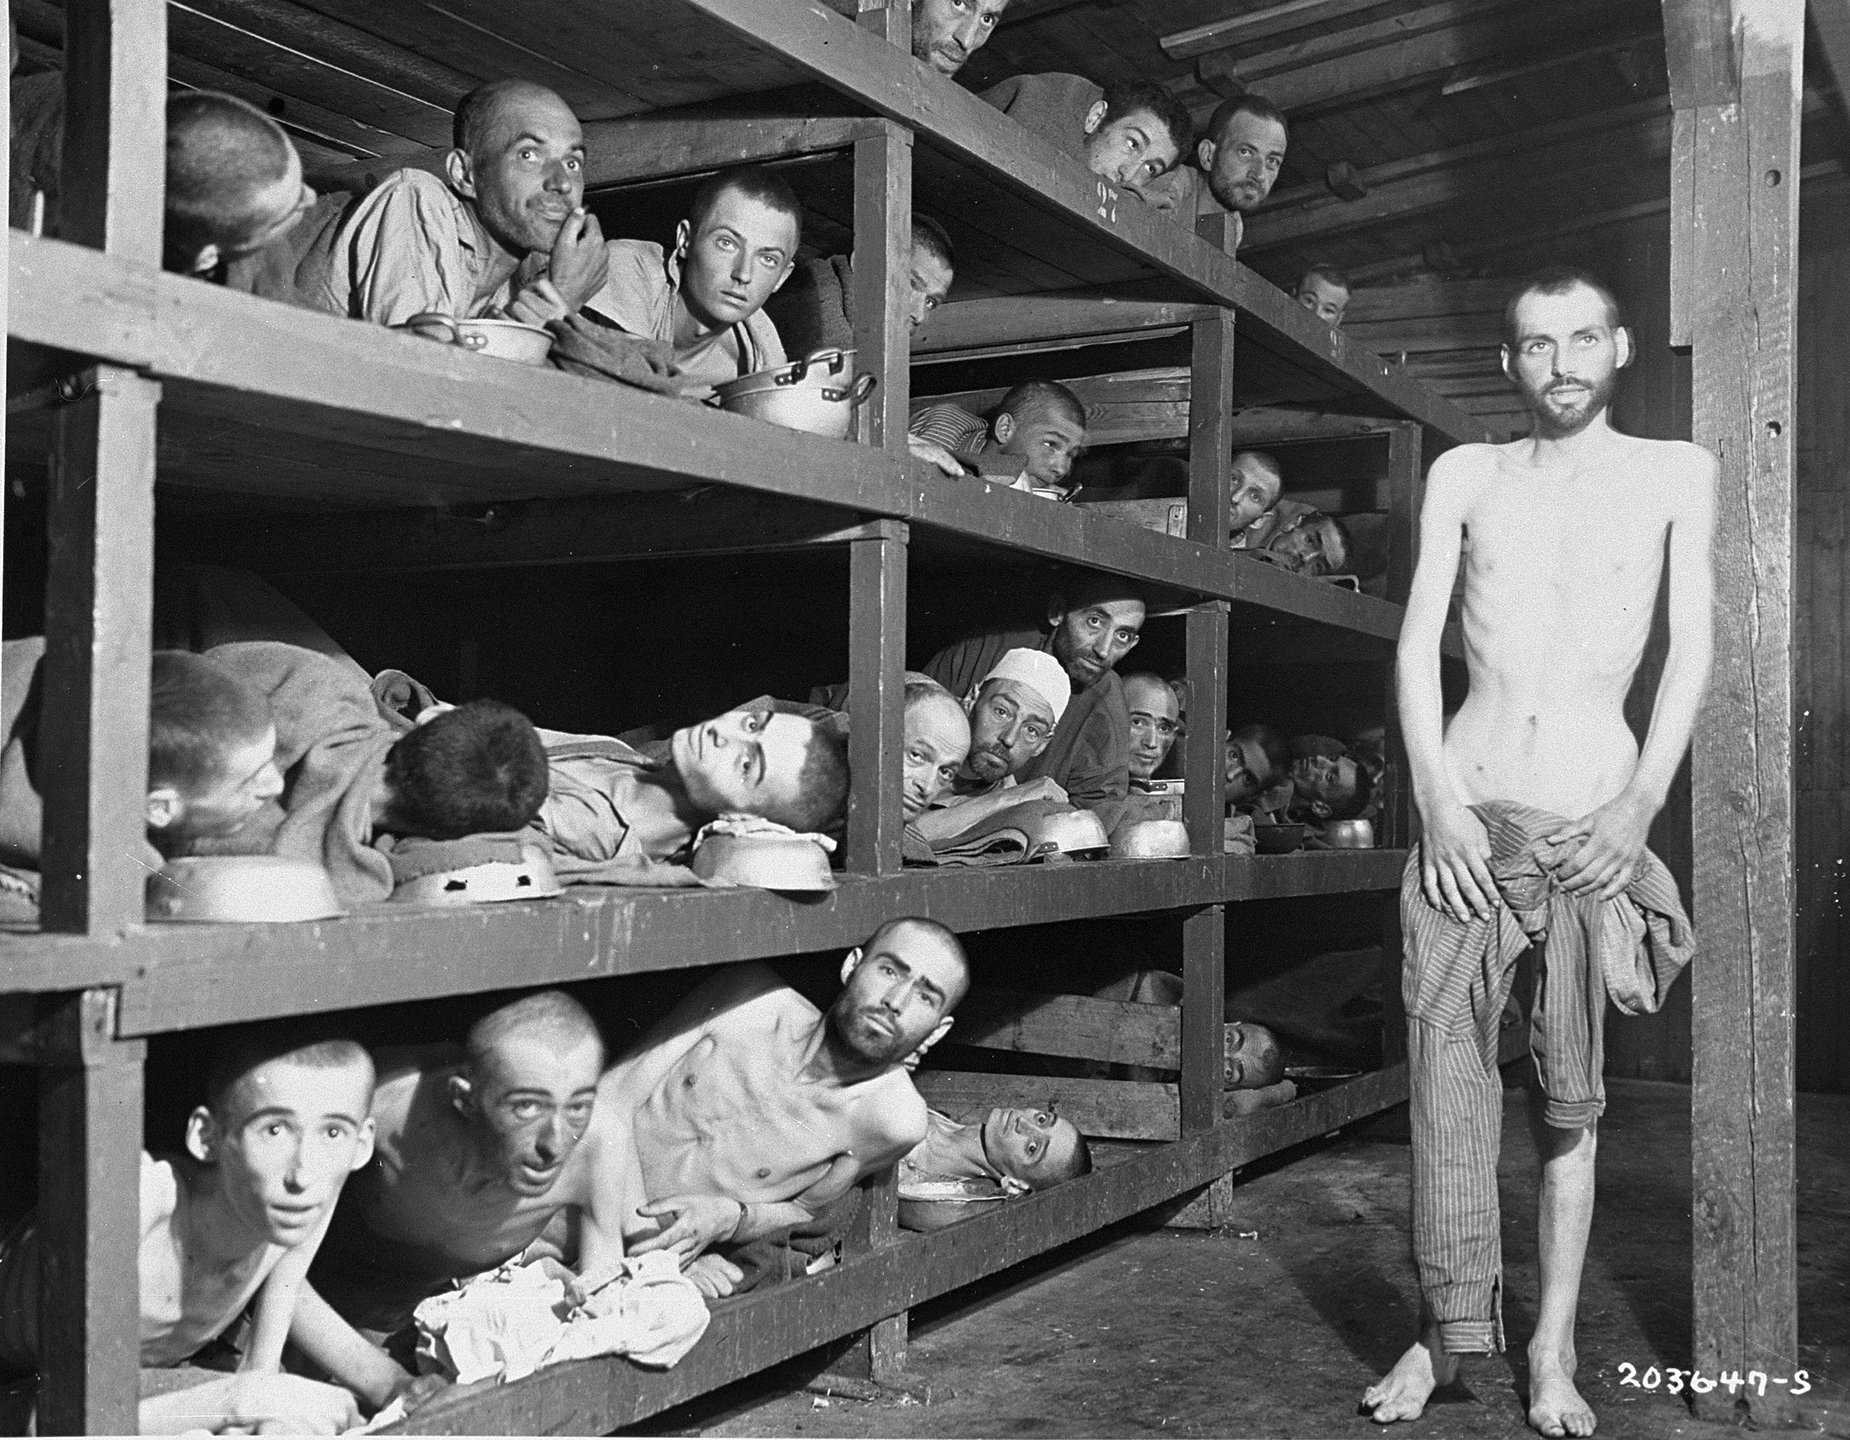 Elie Wiesel in Buchenwald; Wiesel is seen in the second row of bunks, seventh from the left, next to the vertical beam. [Photo: US Holocaust Memorial Museum]